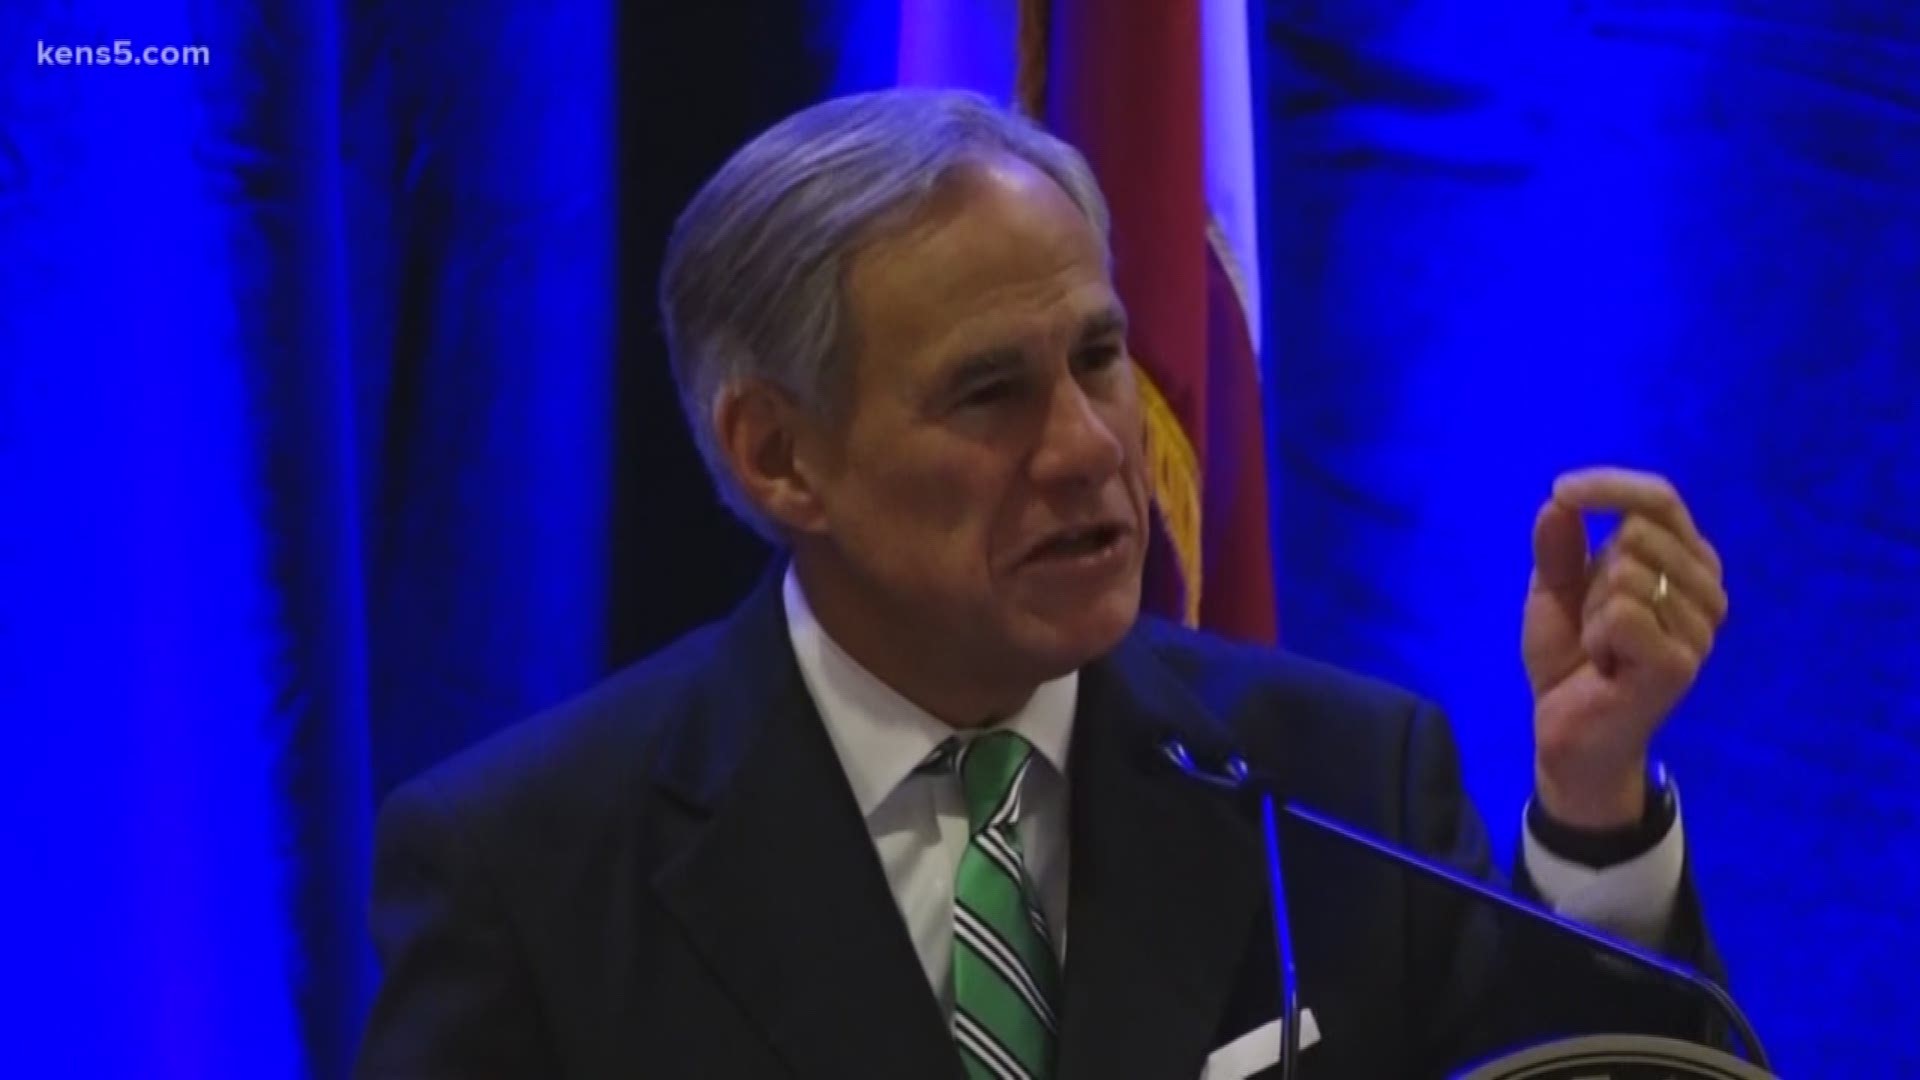 Governor Abbott stops in San Antonio to meet with business leaders and talk about SB 15.